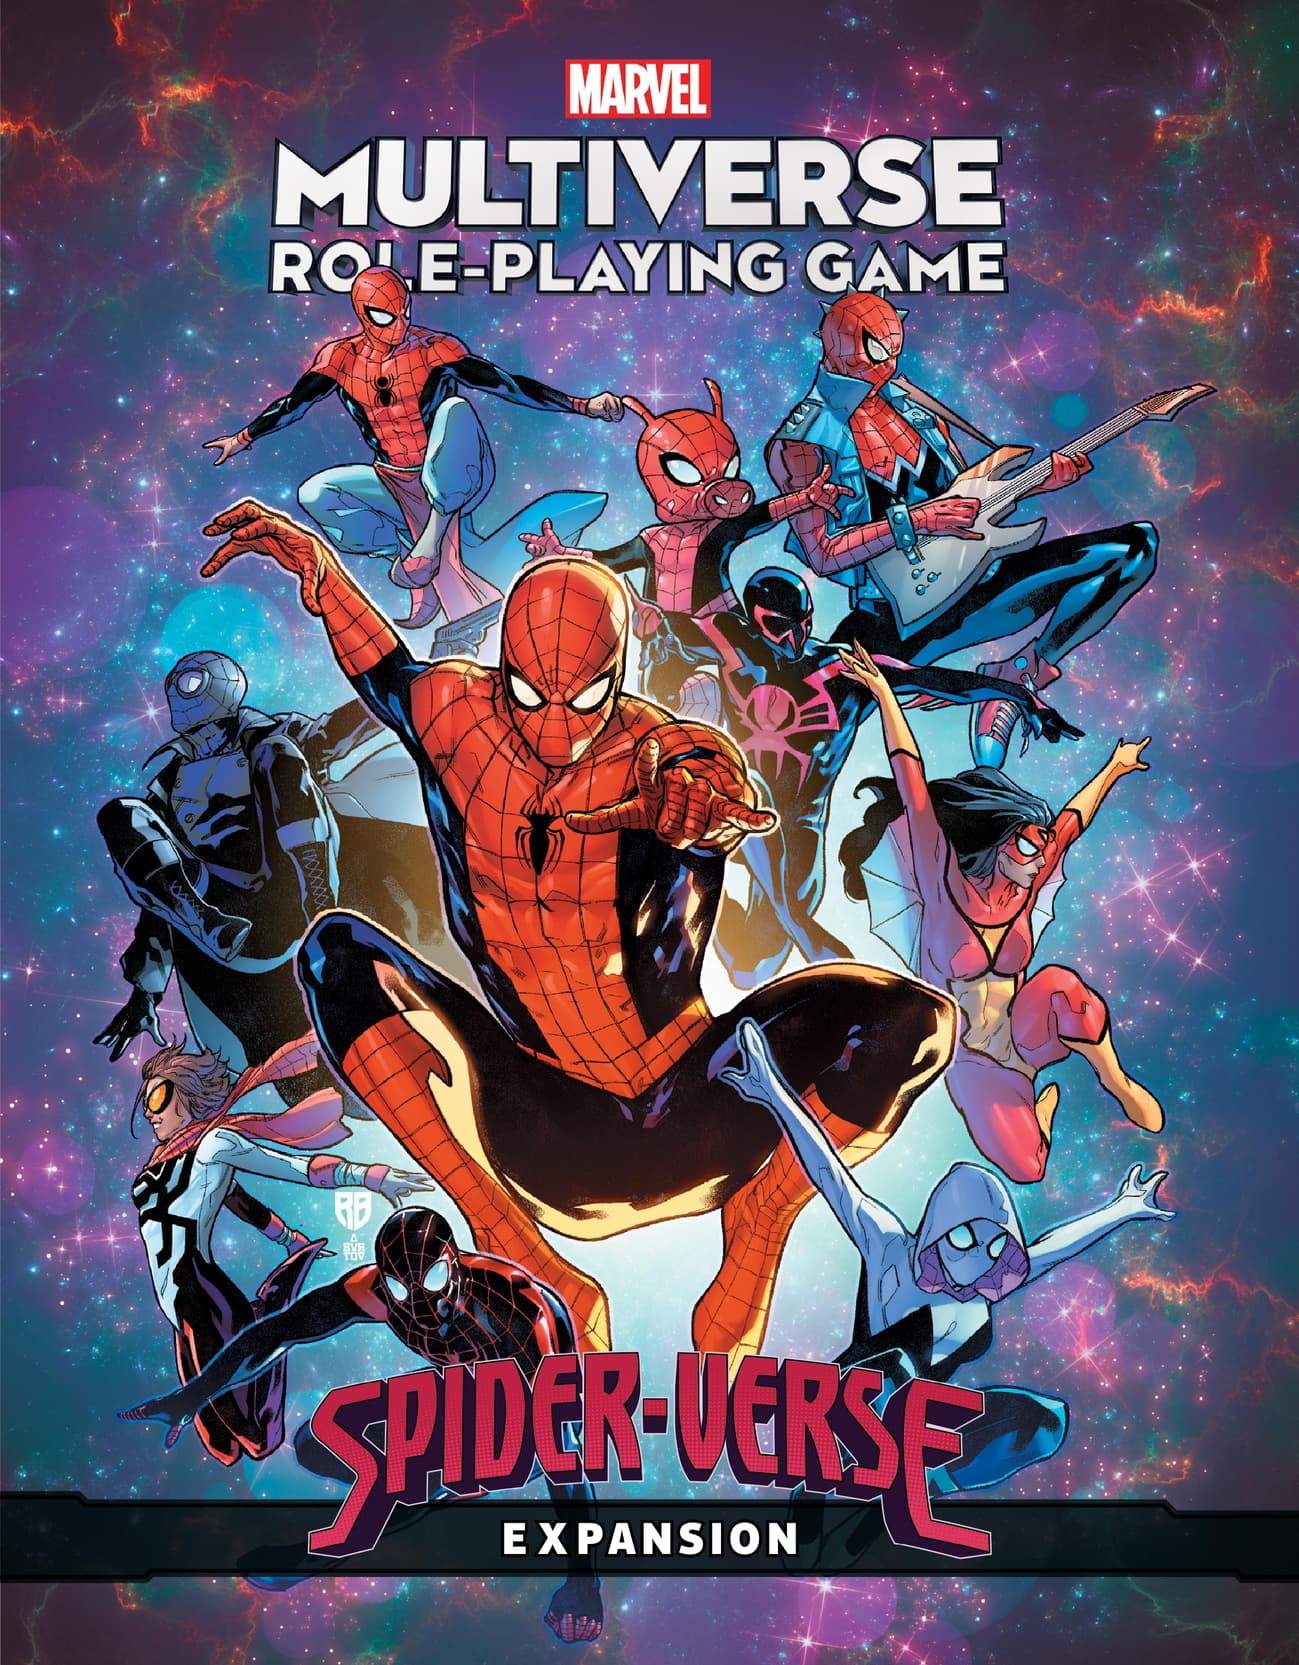 MARVEL MULTIVERSE ROLE-PLAYING GAME: SPIDER-VERSE EXPANSION